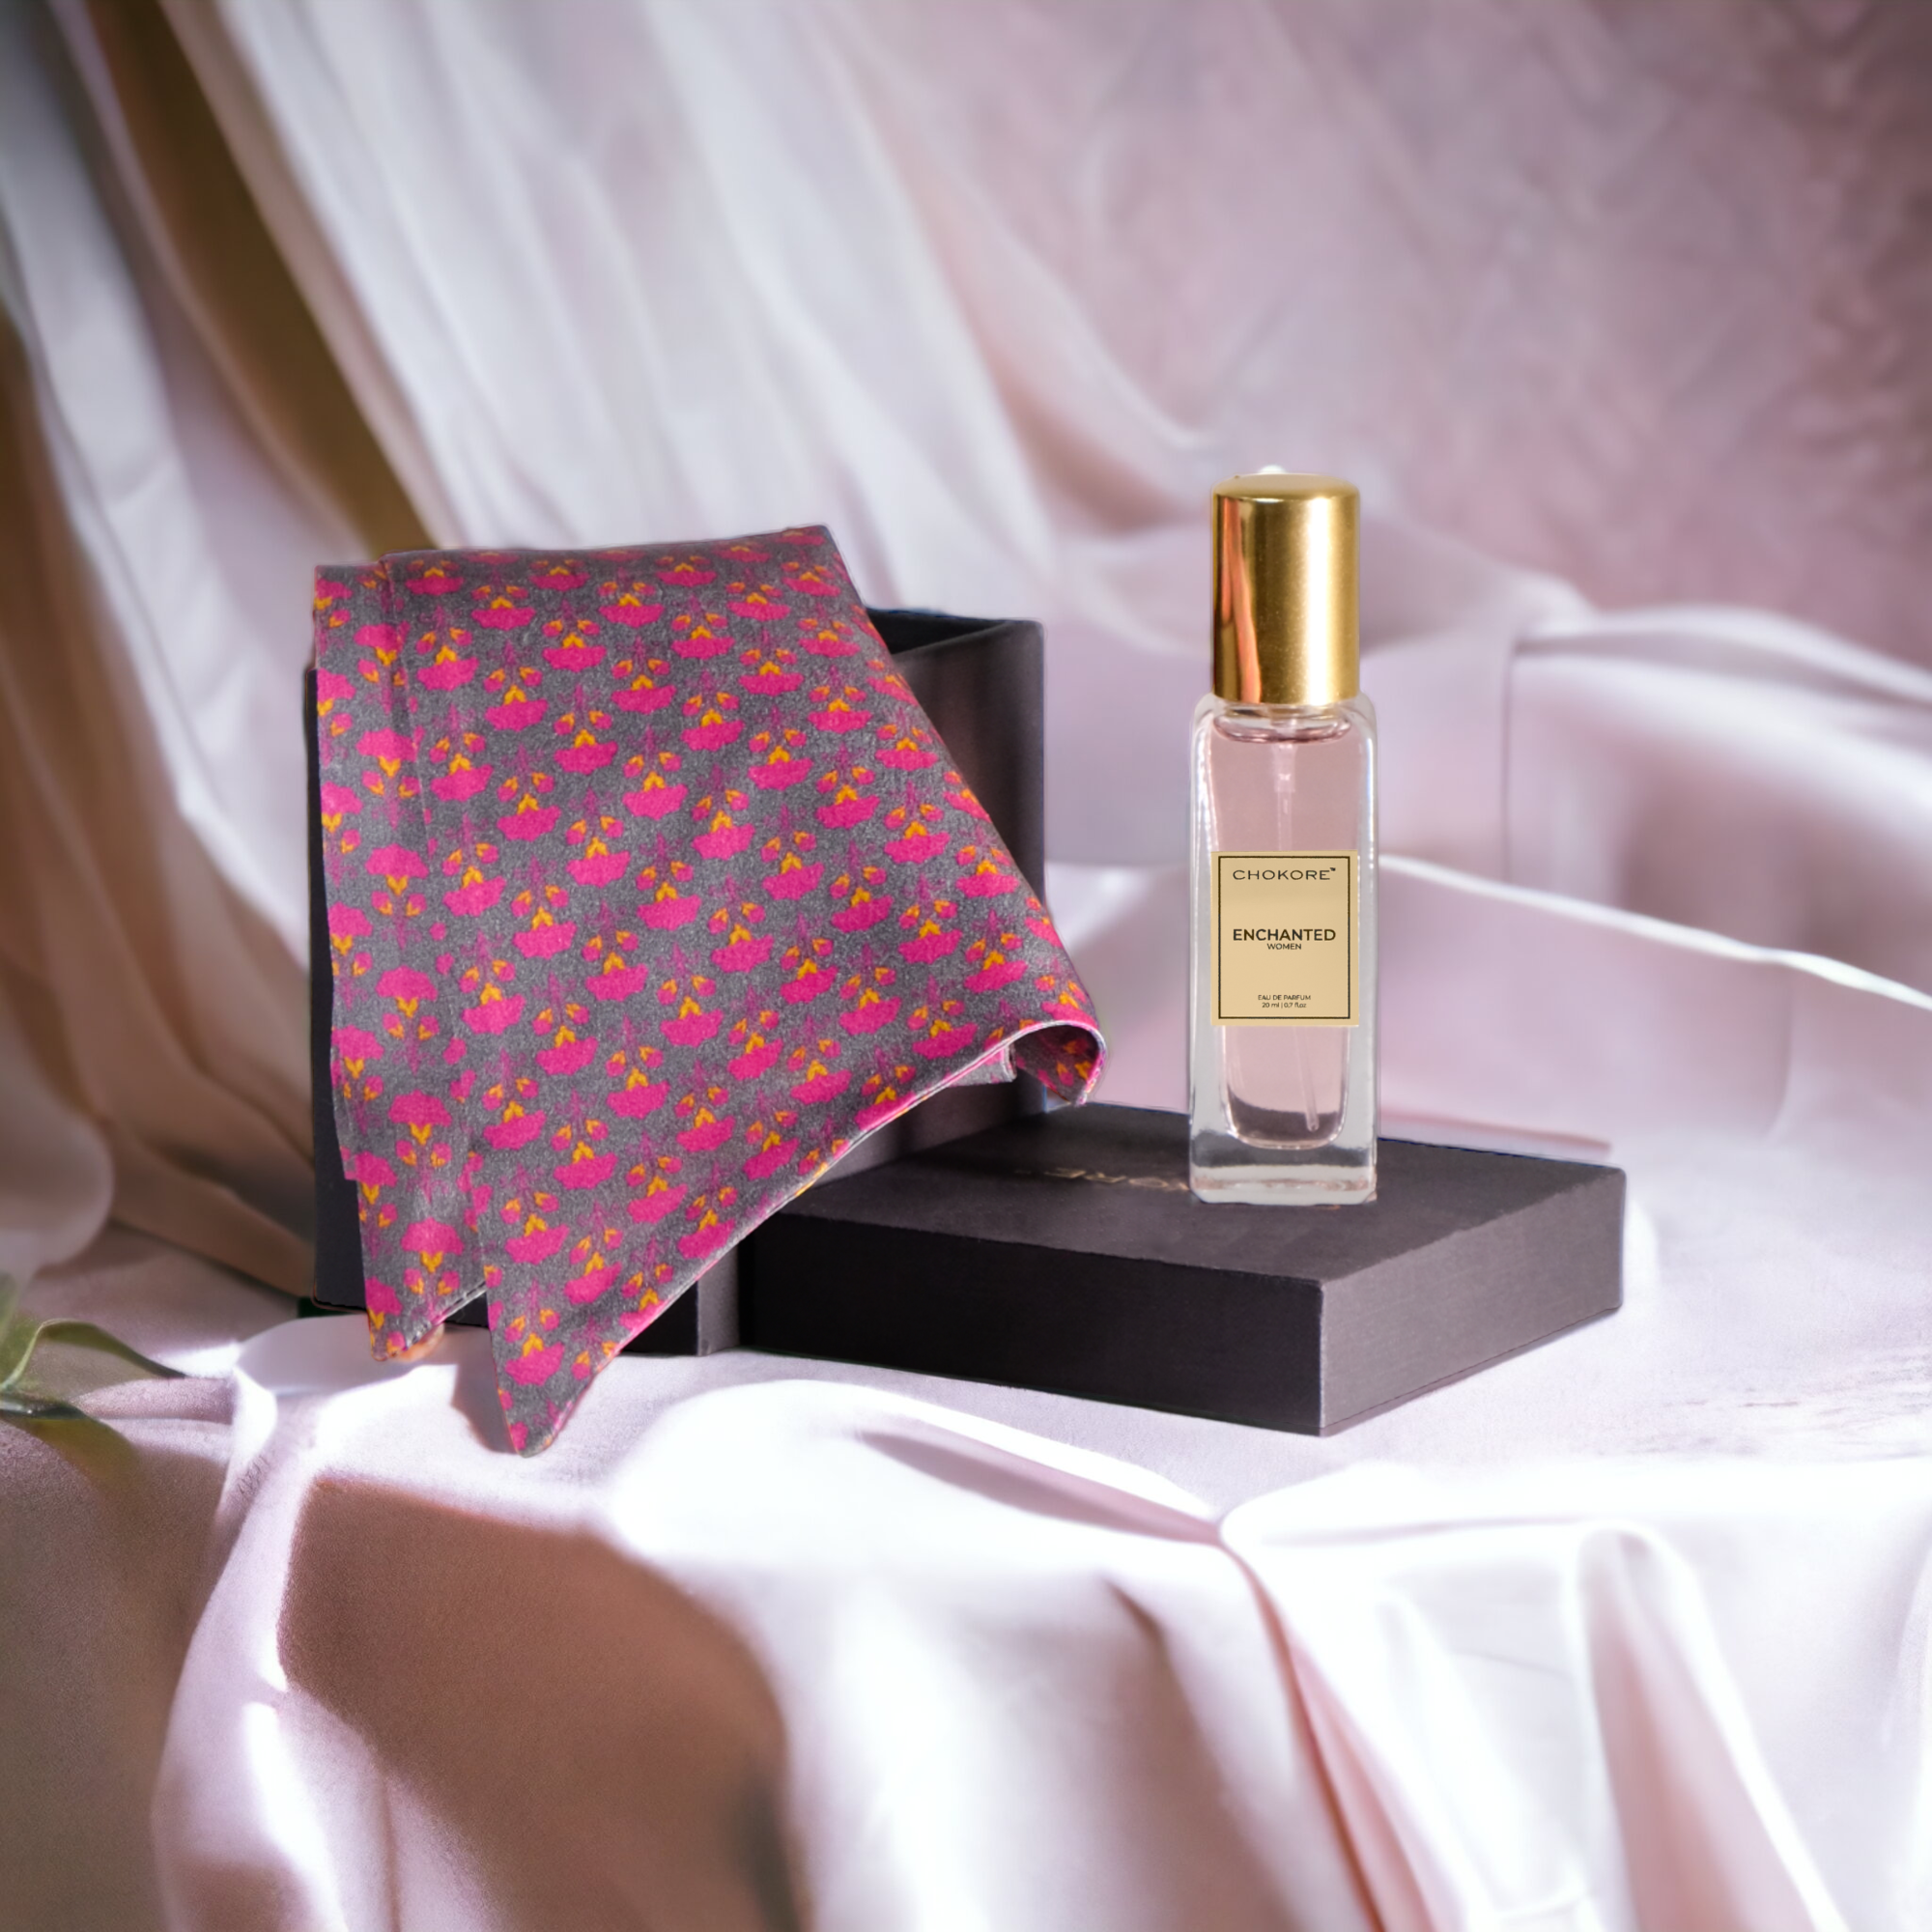 Chokore Special 2-in-1 Gift Set for Chokore Special 2-in-1 Gift Set for Her(Pink and Purple Silk Scarf & 20 ml Enchanted Perfume)Her (Printed Stole & 20 ml Scandalous Perfume)